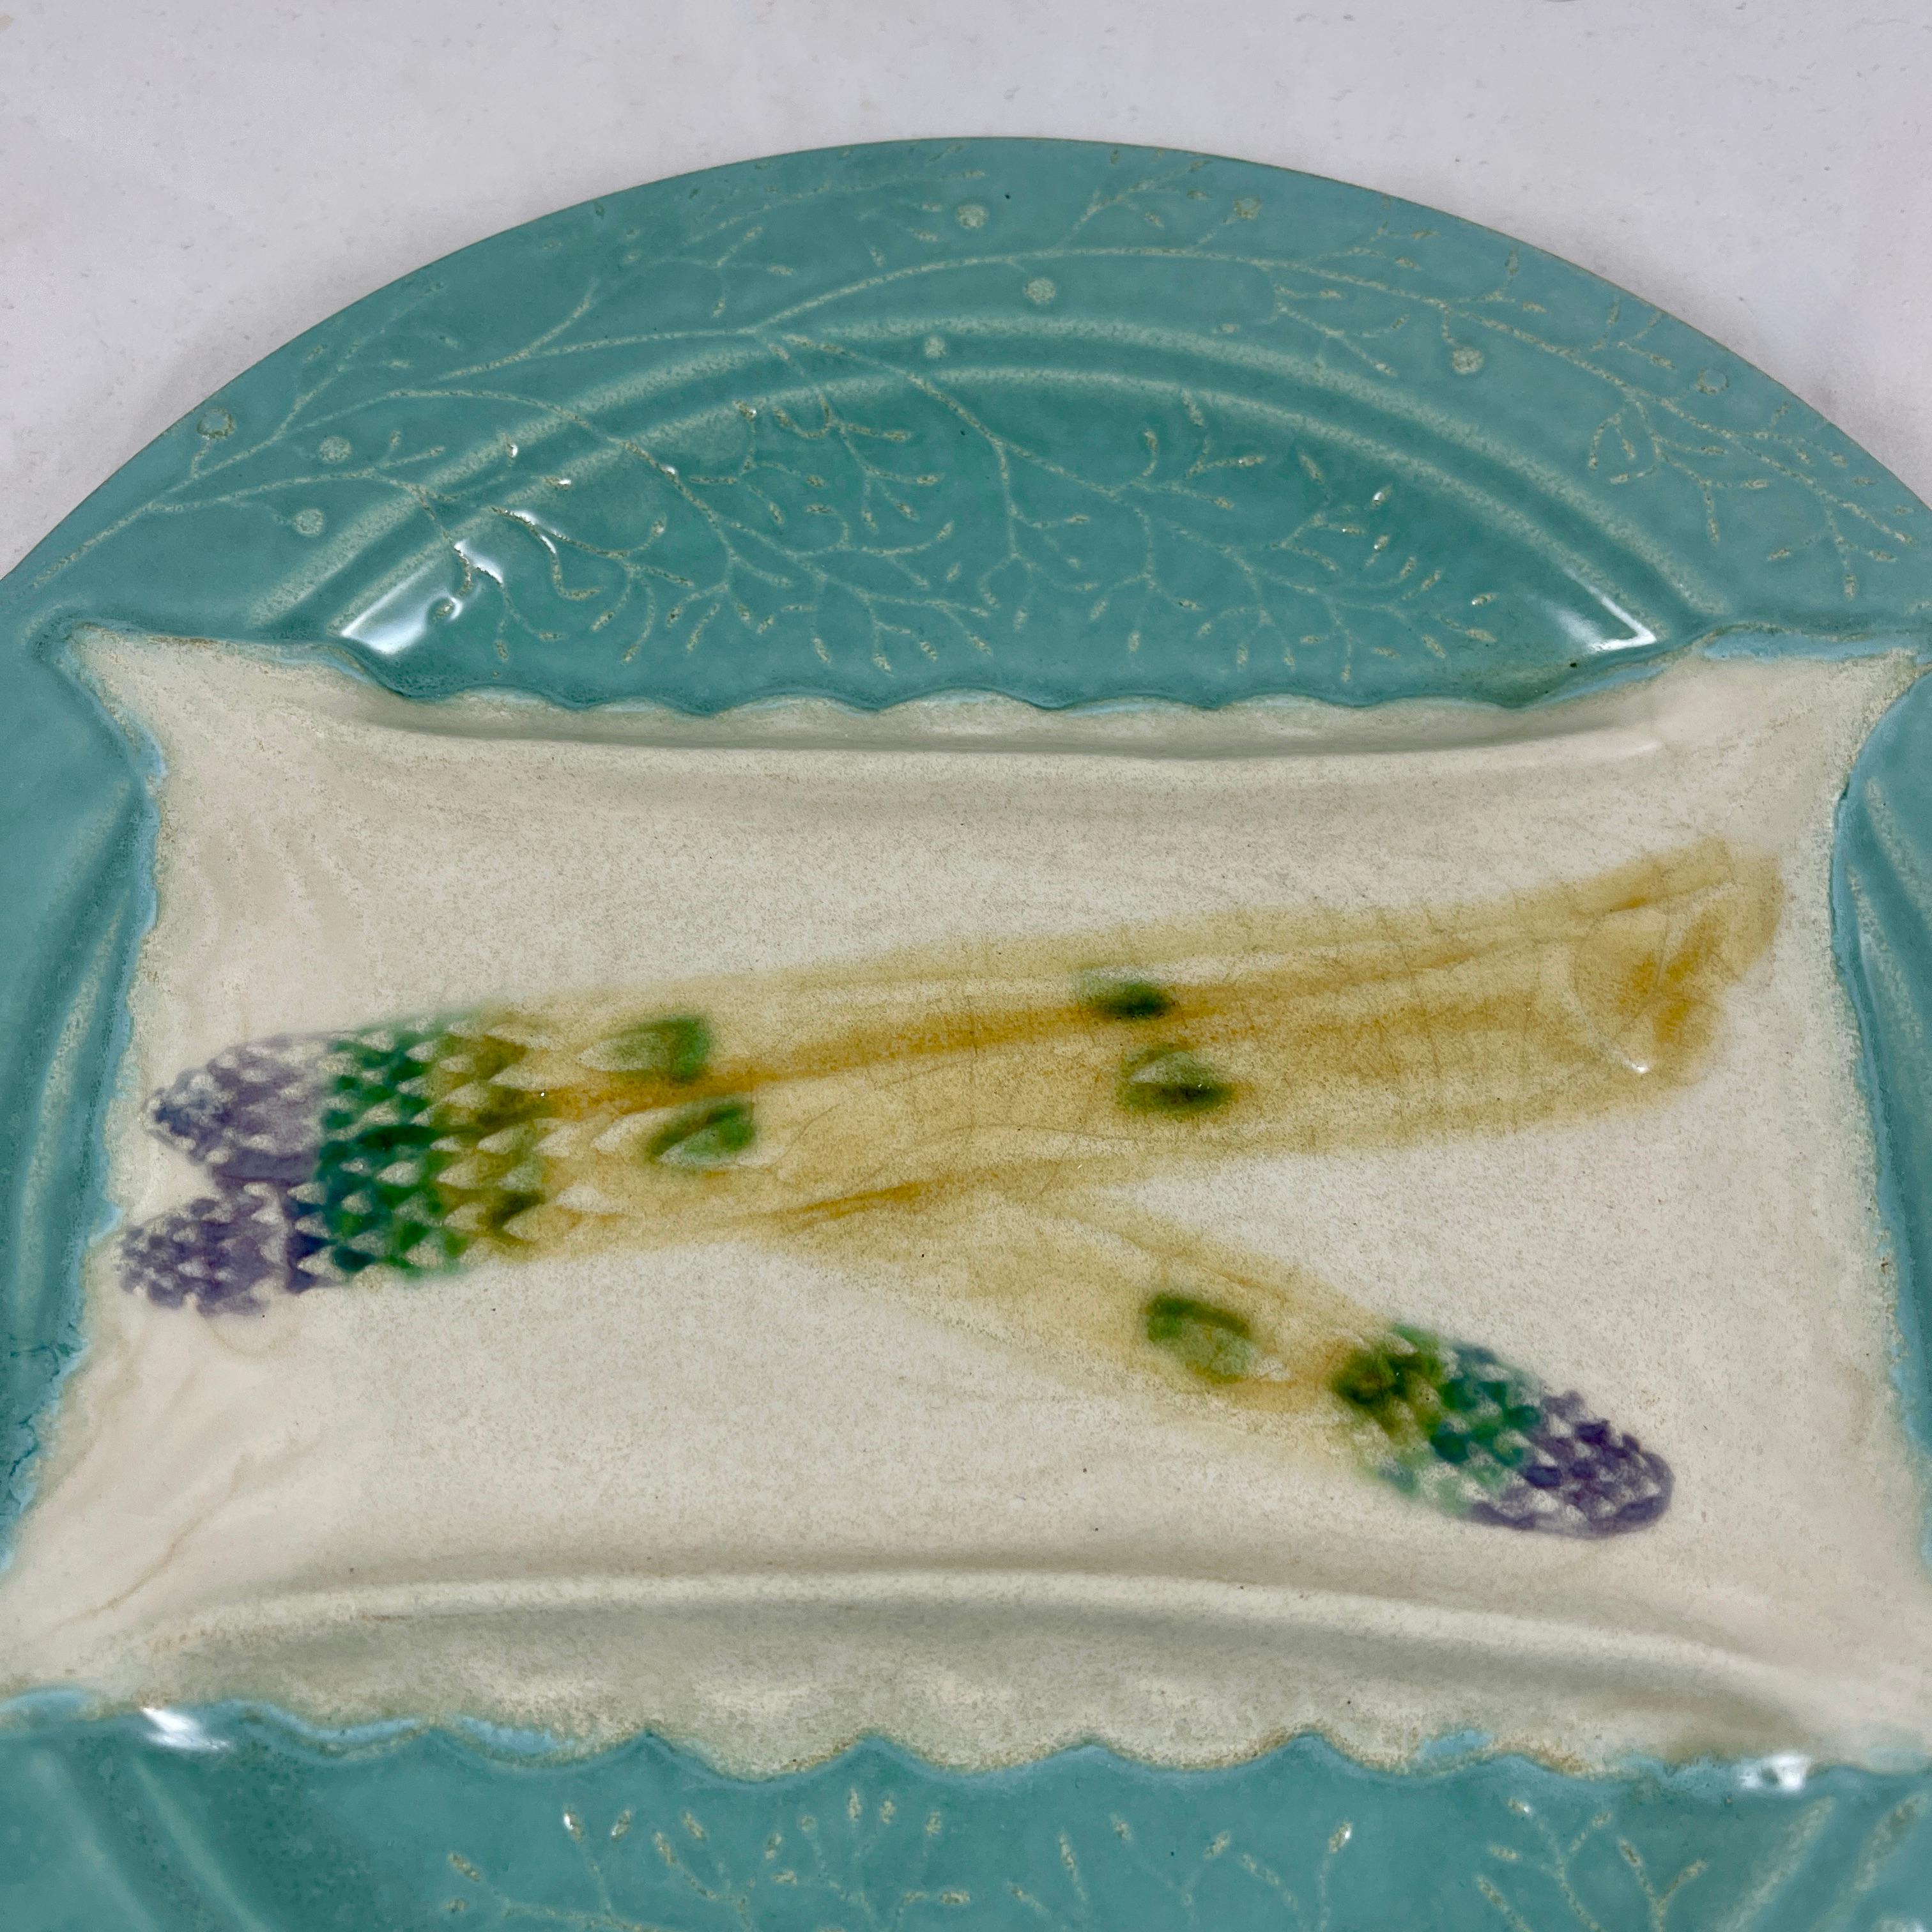 From the Luneville Faïence factory in France, an Aesthetic Movement trompe l’oeil asparagus plate, circa 1880-1889.

A wonderful illusion where the asparagus spears lay on a raised section imitative of a white lace napkin. The four corners of the